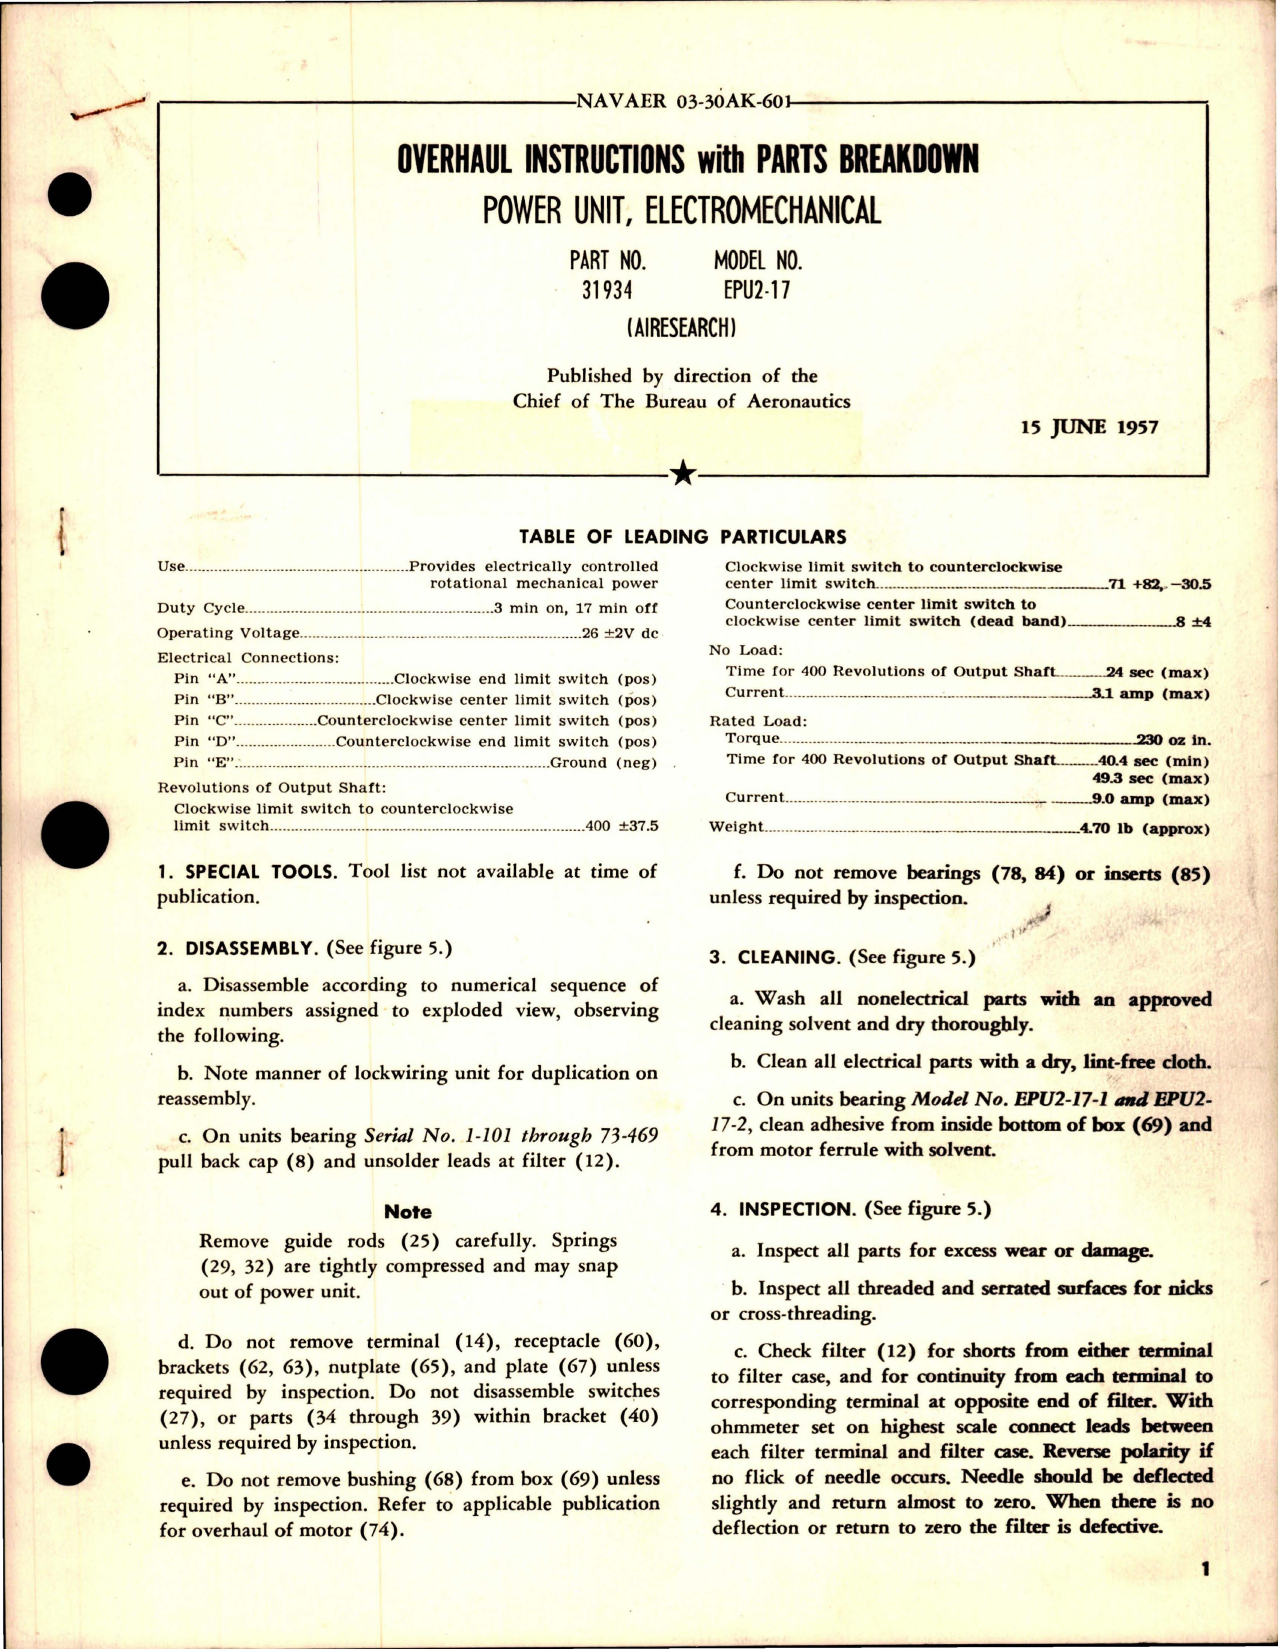 Sample page 1 from AirCorps Library document: Overhaul Instruction with Parts for Electromechanical Power Unit - Part 31934 - Model EPU2-17